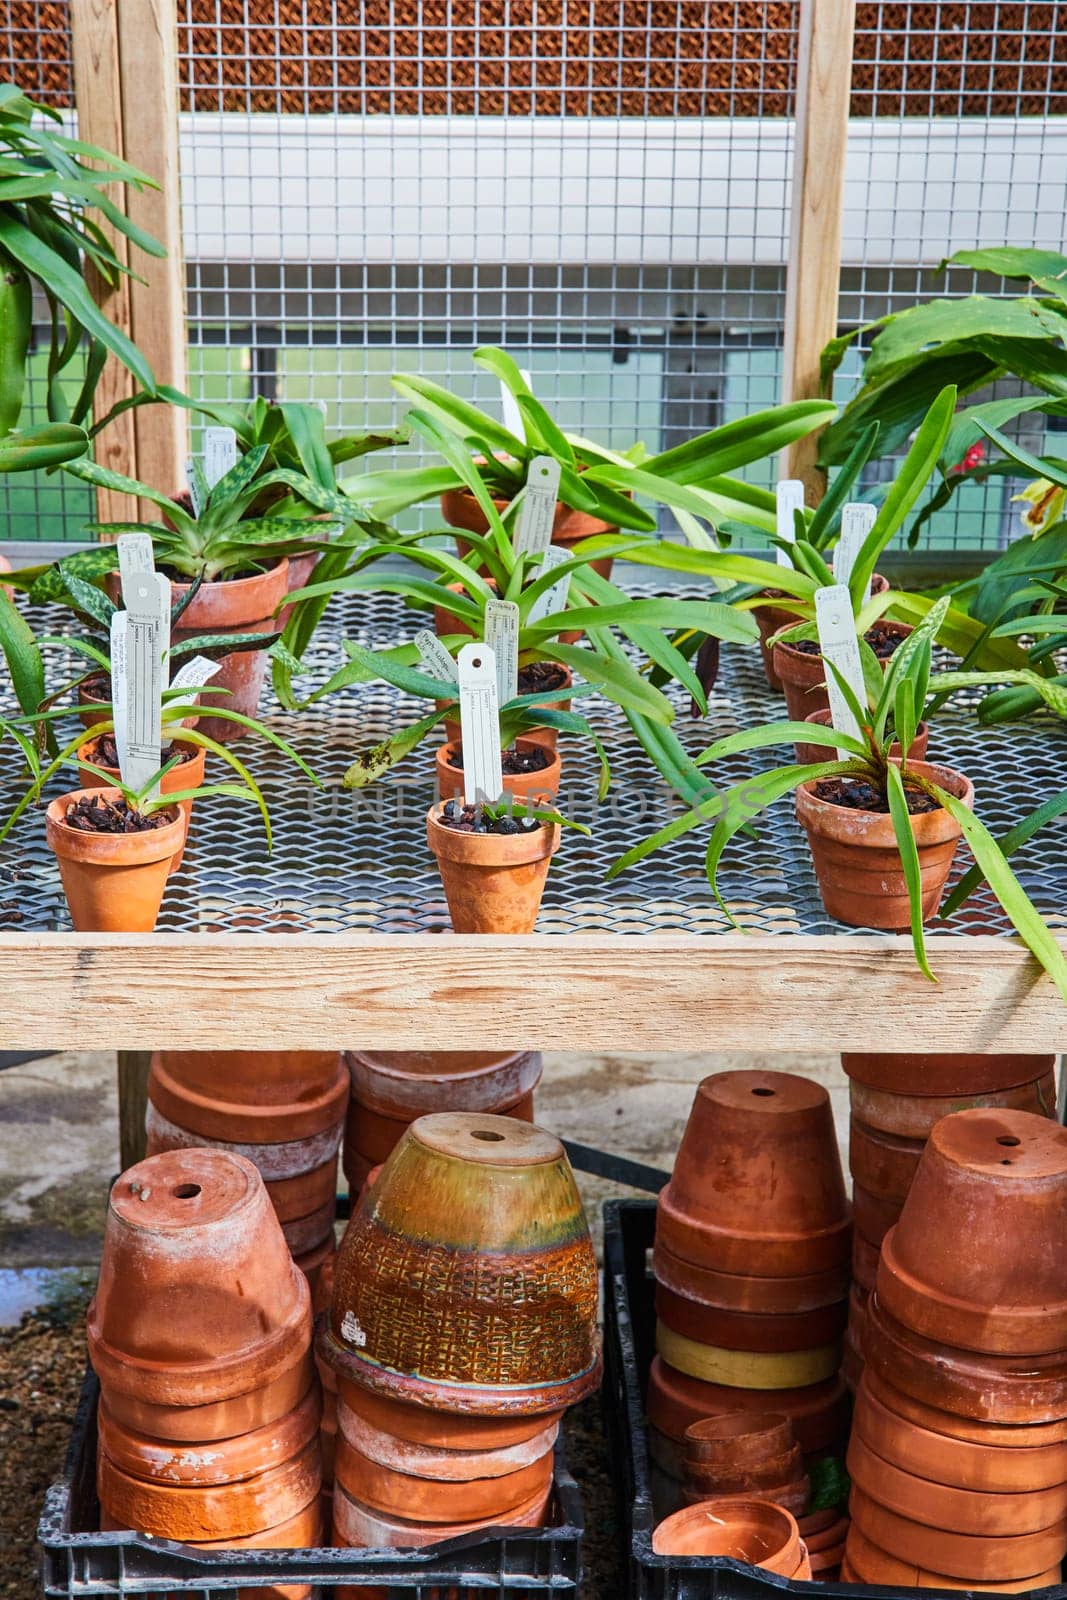 Organized horticultural scene with potted orchids and terracotta pots in a Muncie, Indiana greenhouse, showcasing themes of gardening and plant care, 2023.